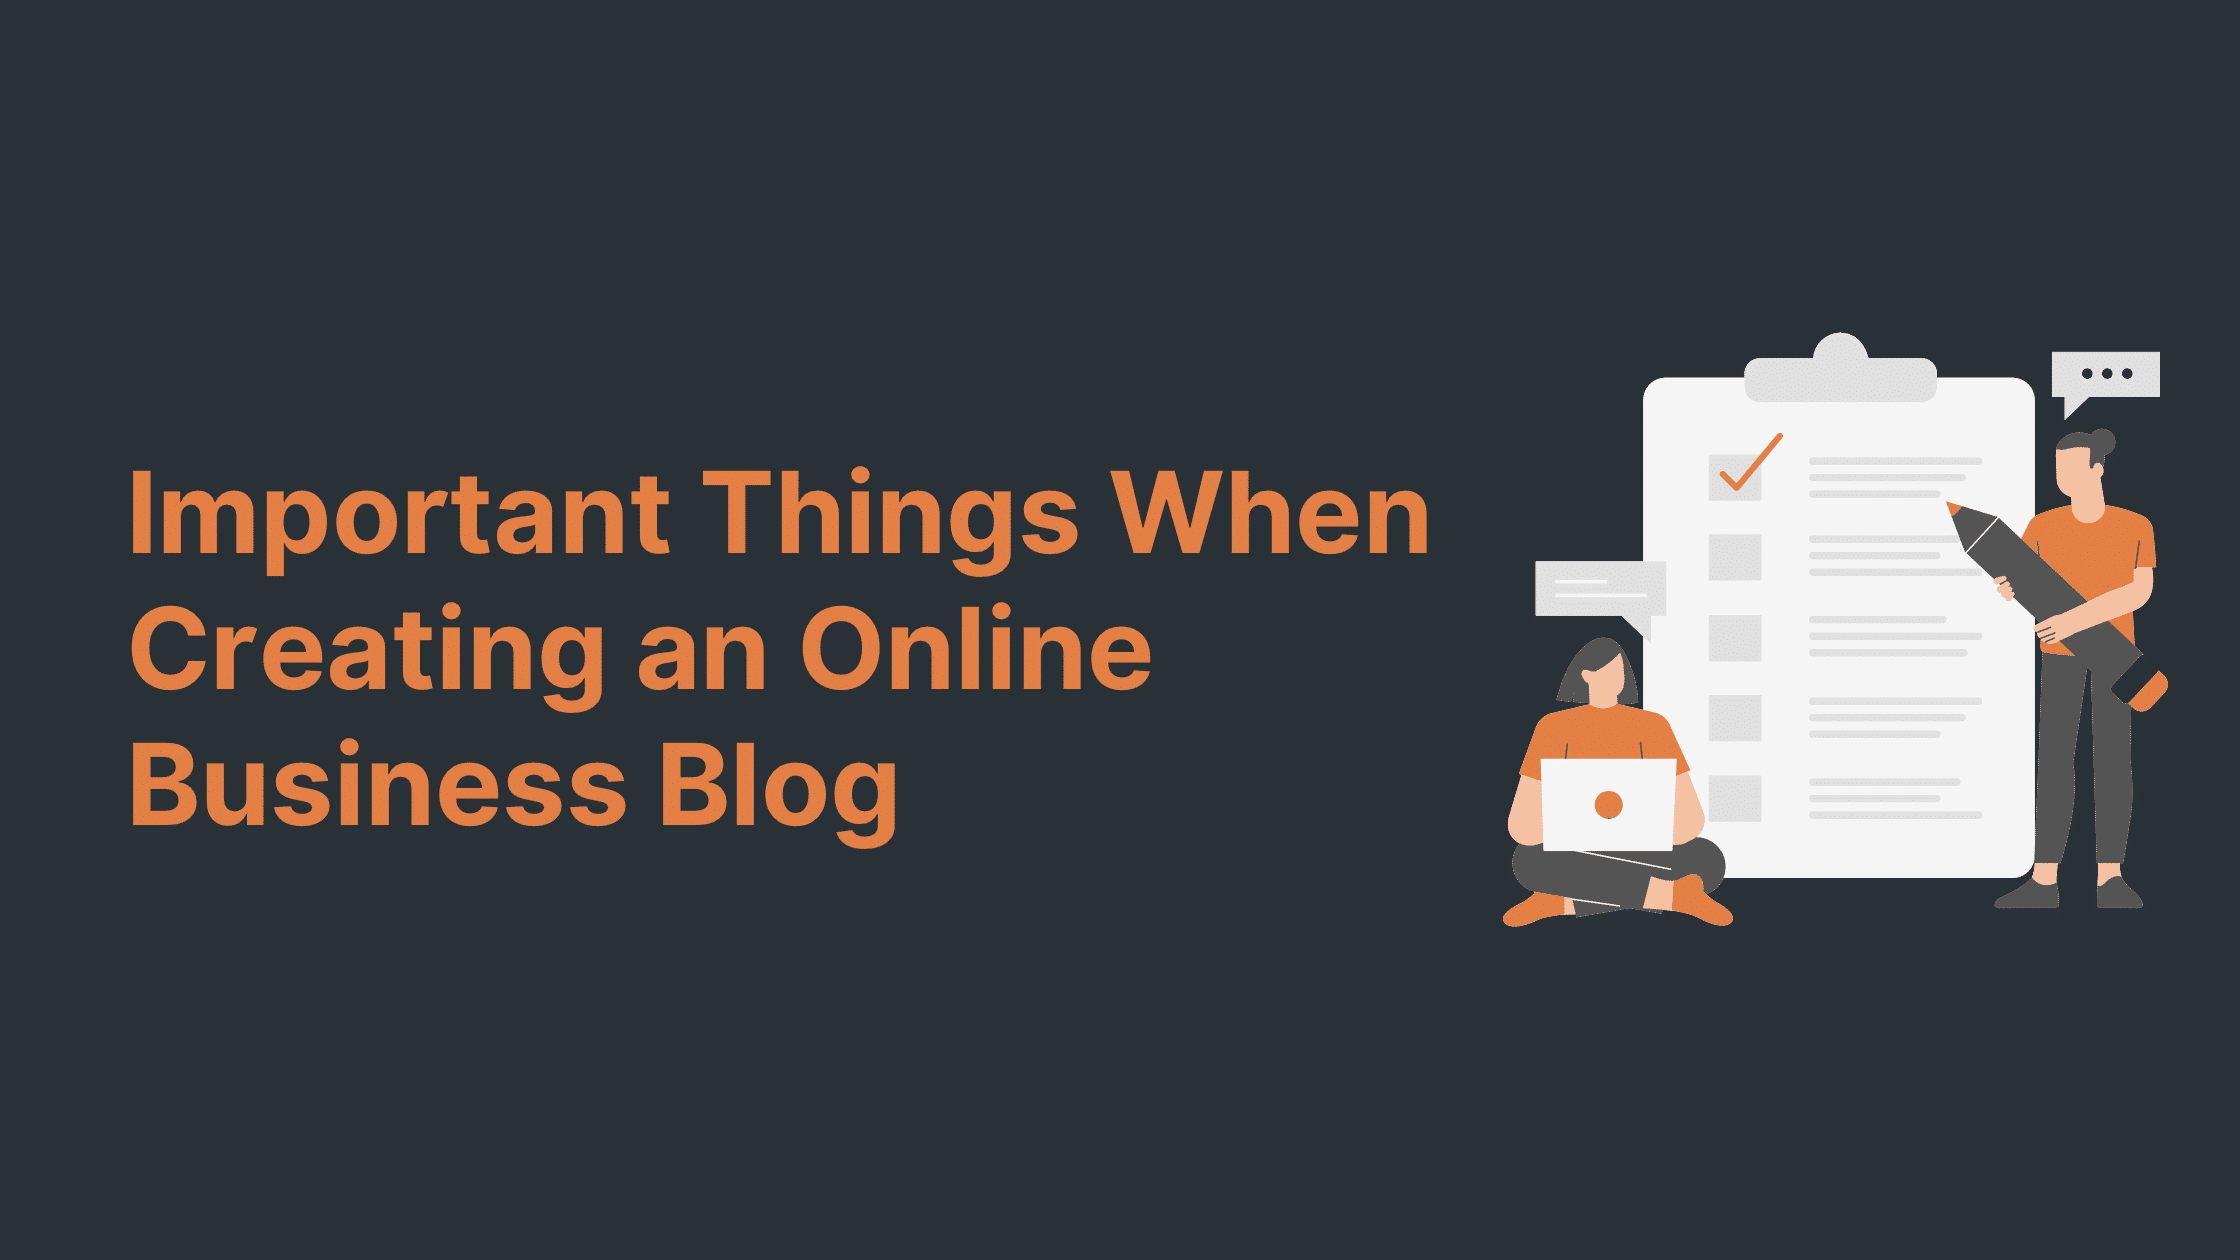 8 Important Things When Creating an Online Business Blog